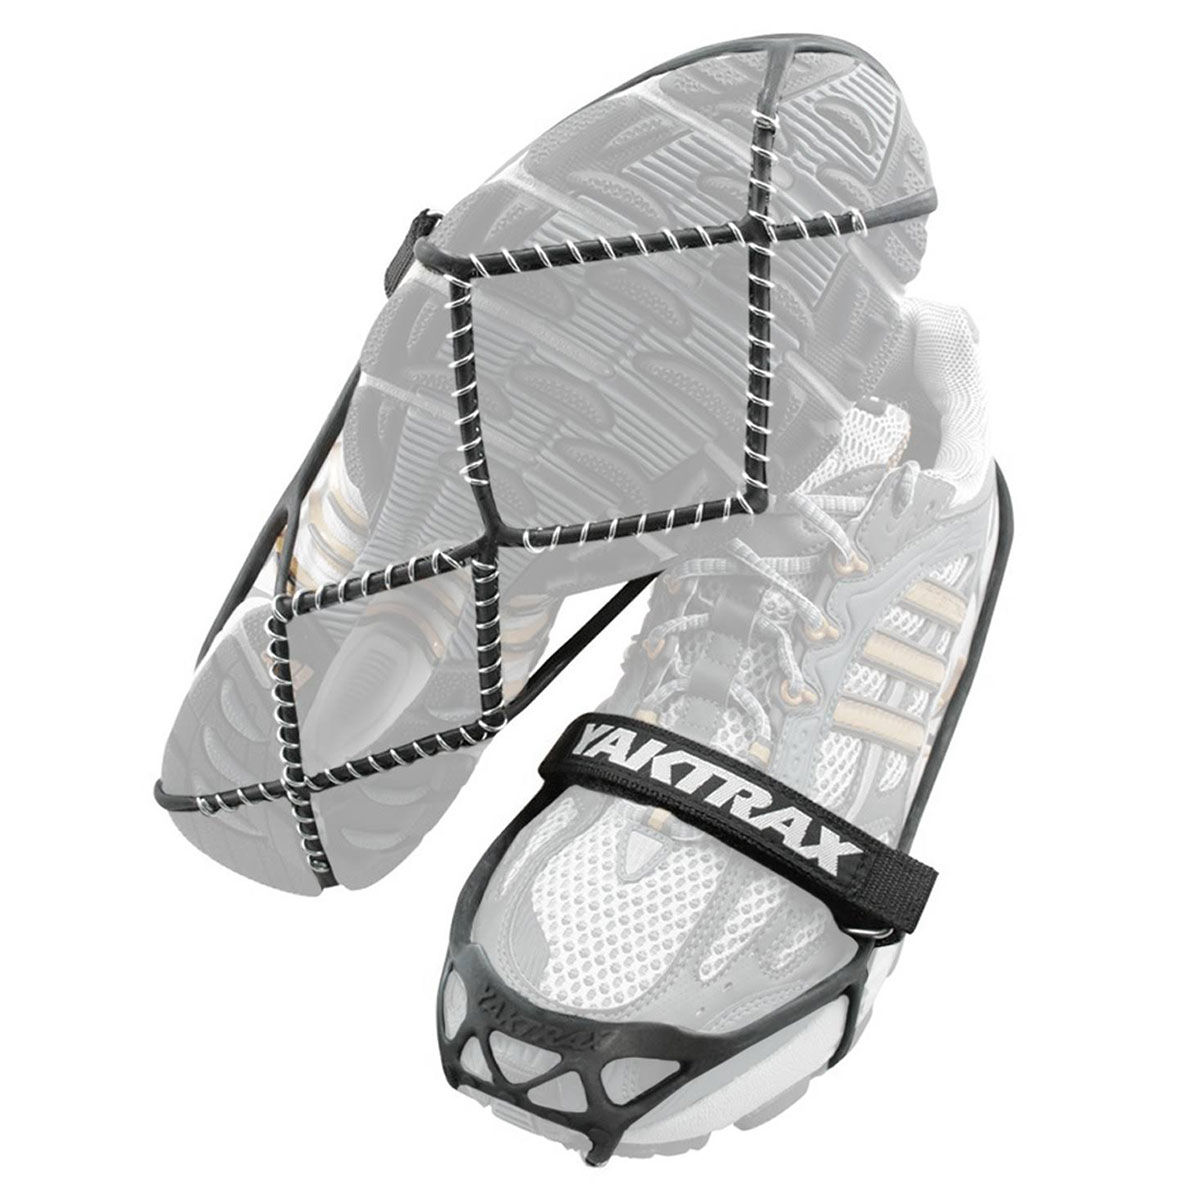 Yaktrax Pro Traction Device - Various Patterns, XL